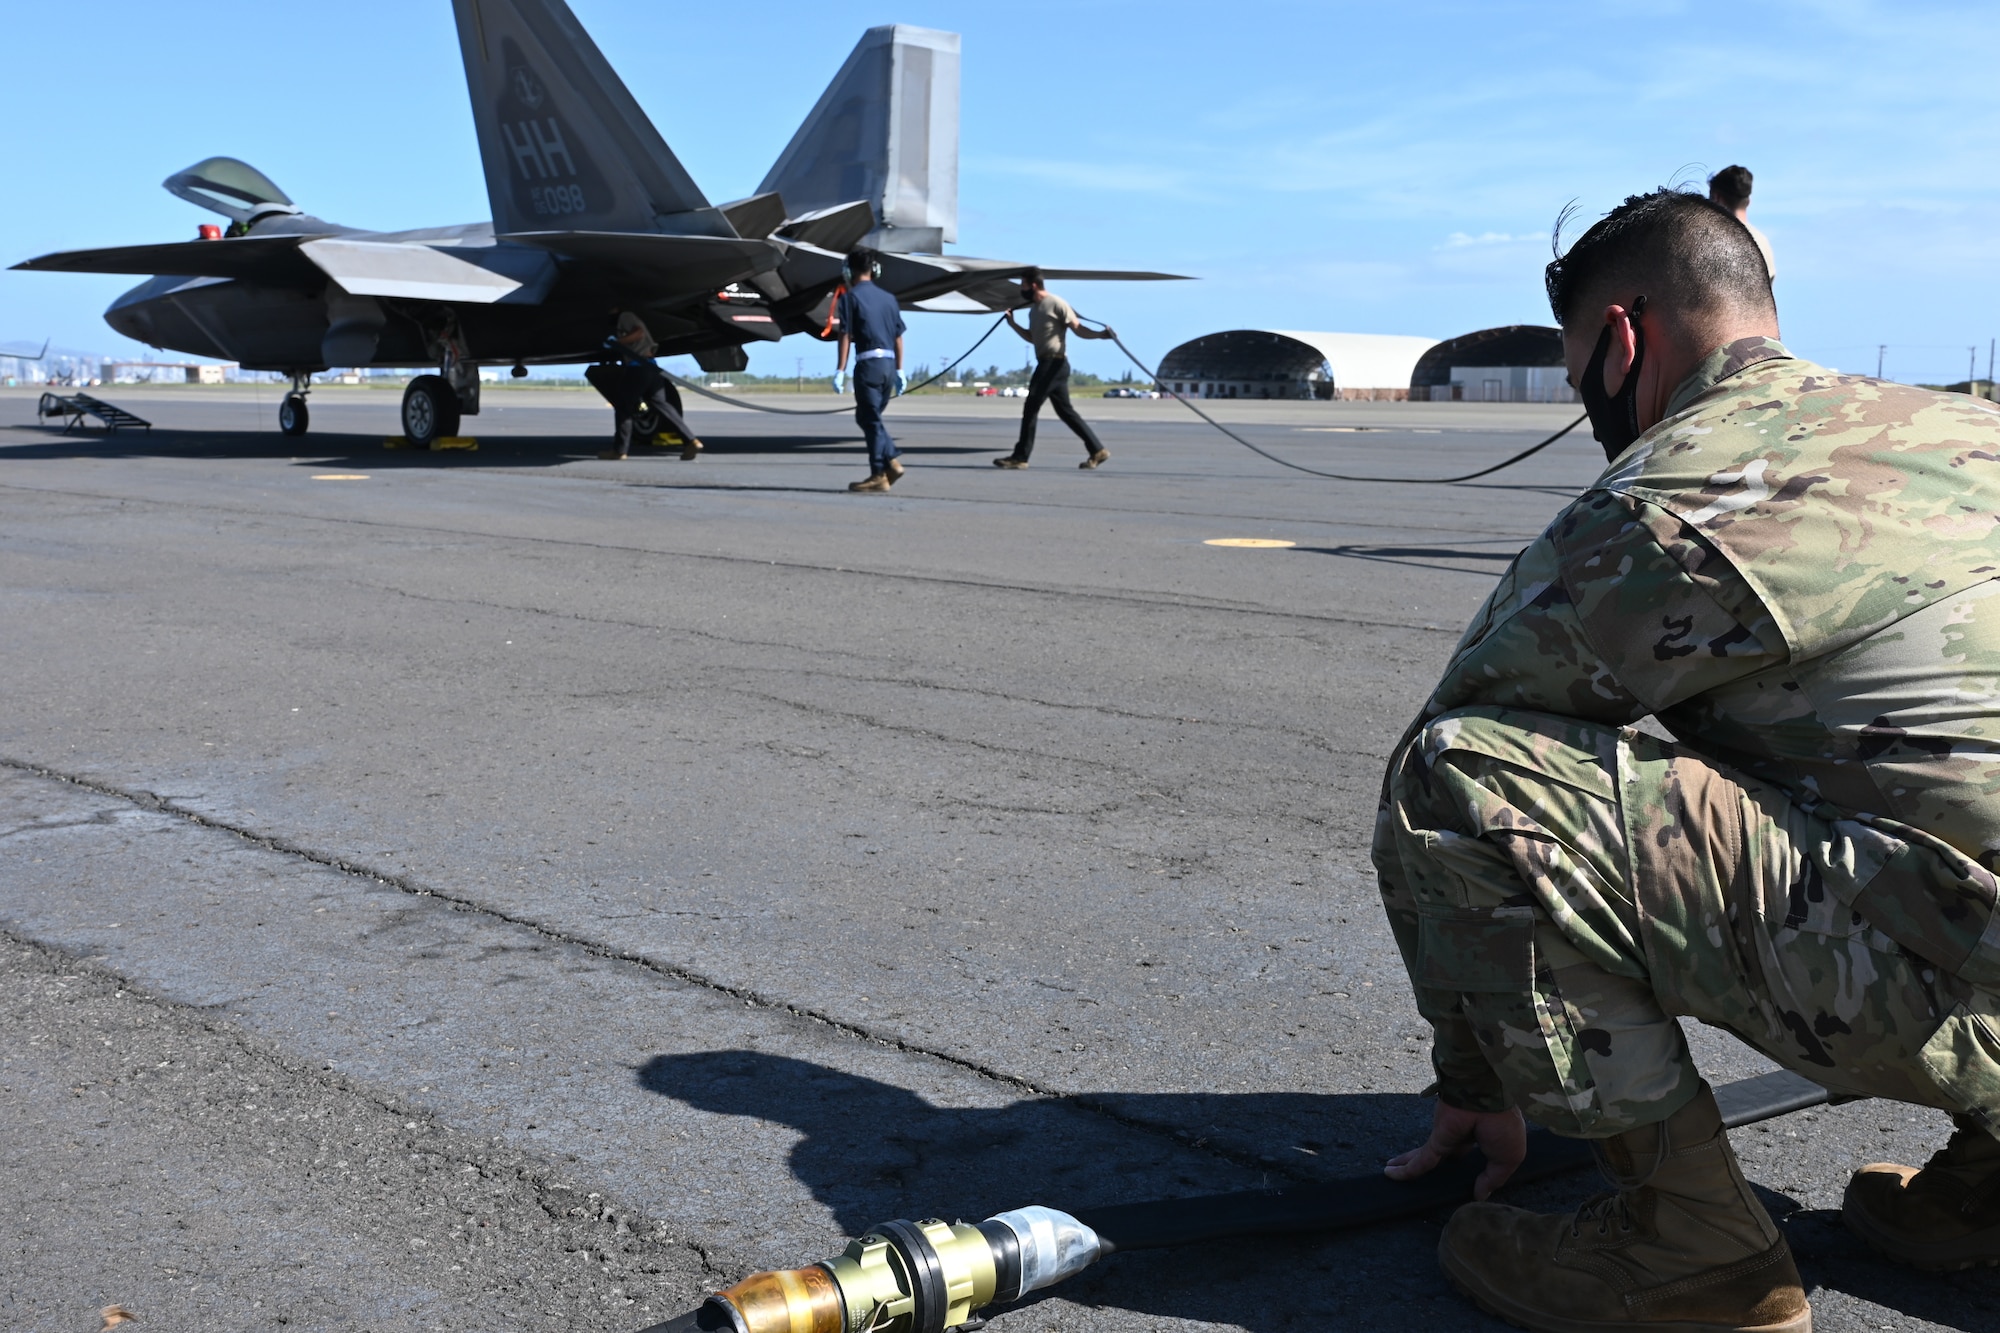 Tech Sgt. Robert Rabacal, 154th Aircraft Maintenance Squadron F-22 maintenance technician holds down a refueling hose while fellow Airmen position it towards an F-22 Raptor, Feb. 25, 2021, Joint Base Pearl Harbor-Hickam.